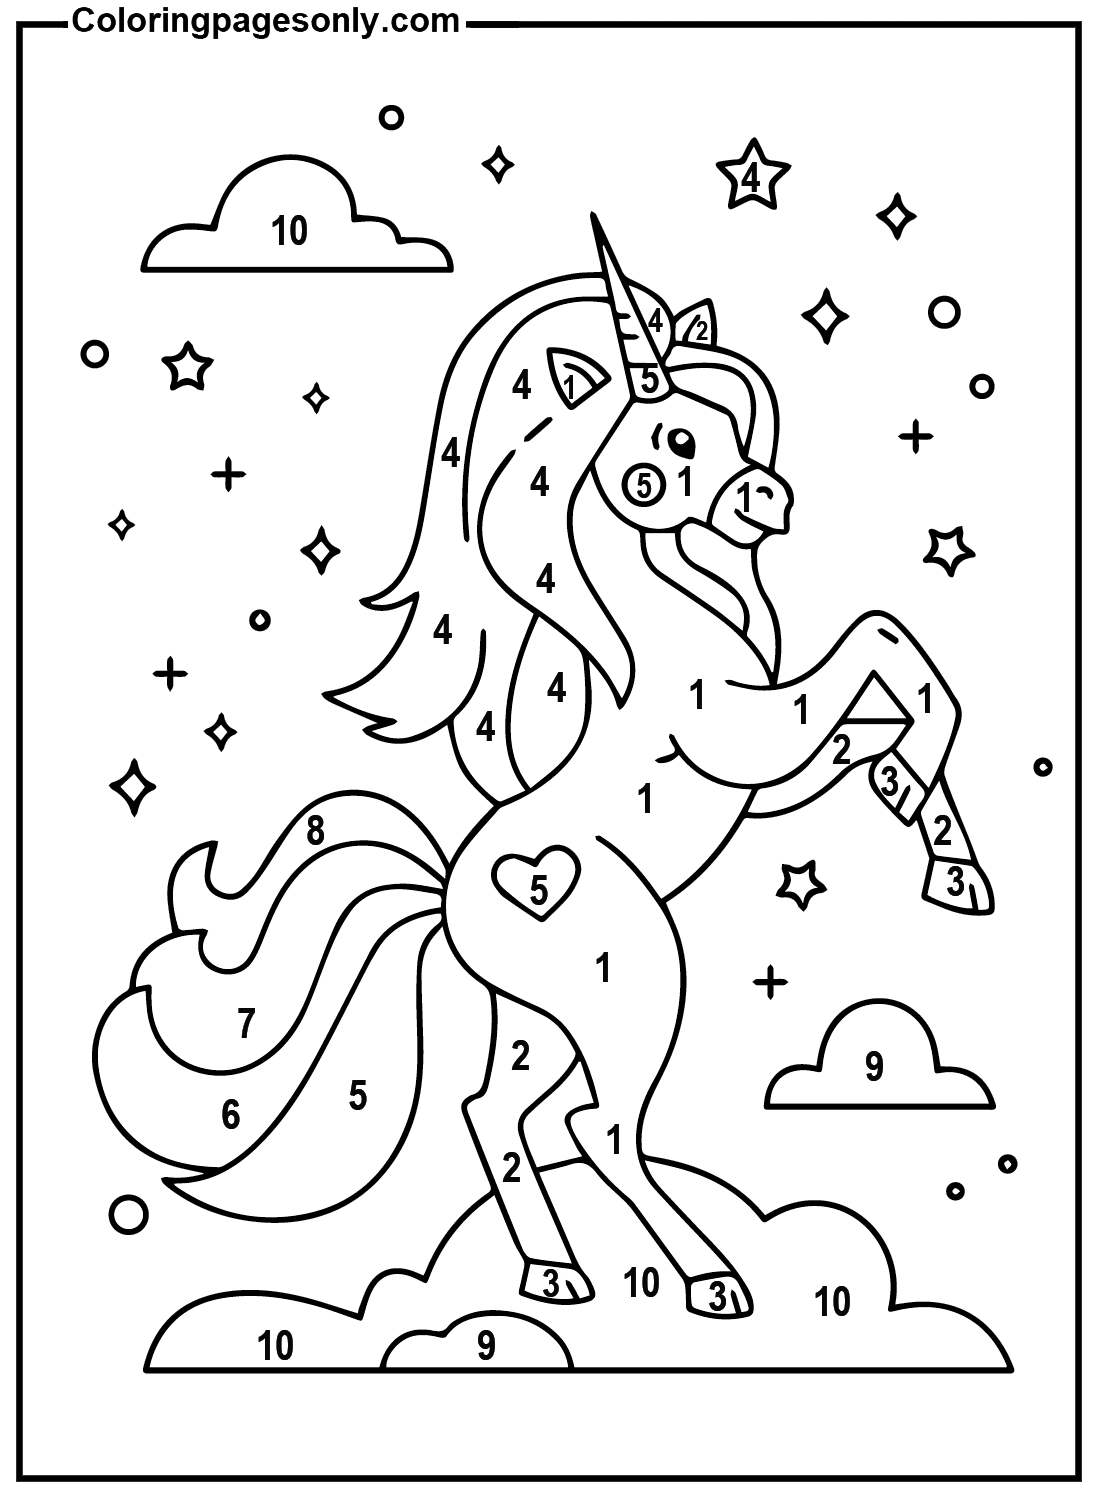 Color By Number Unicorn Pictures Coloring Pages